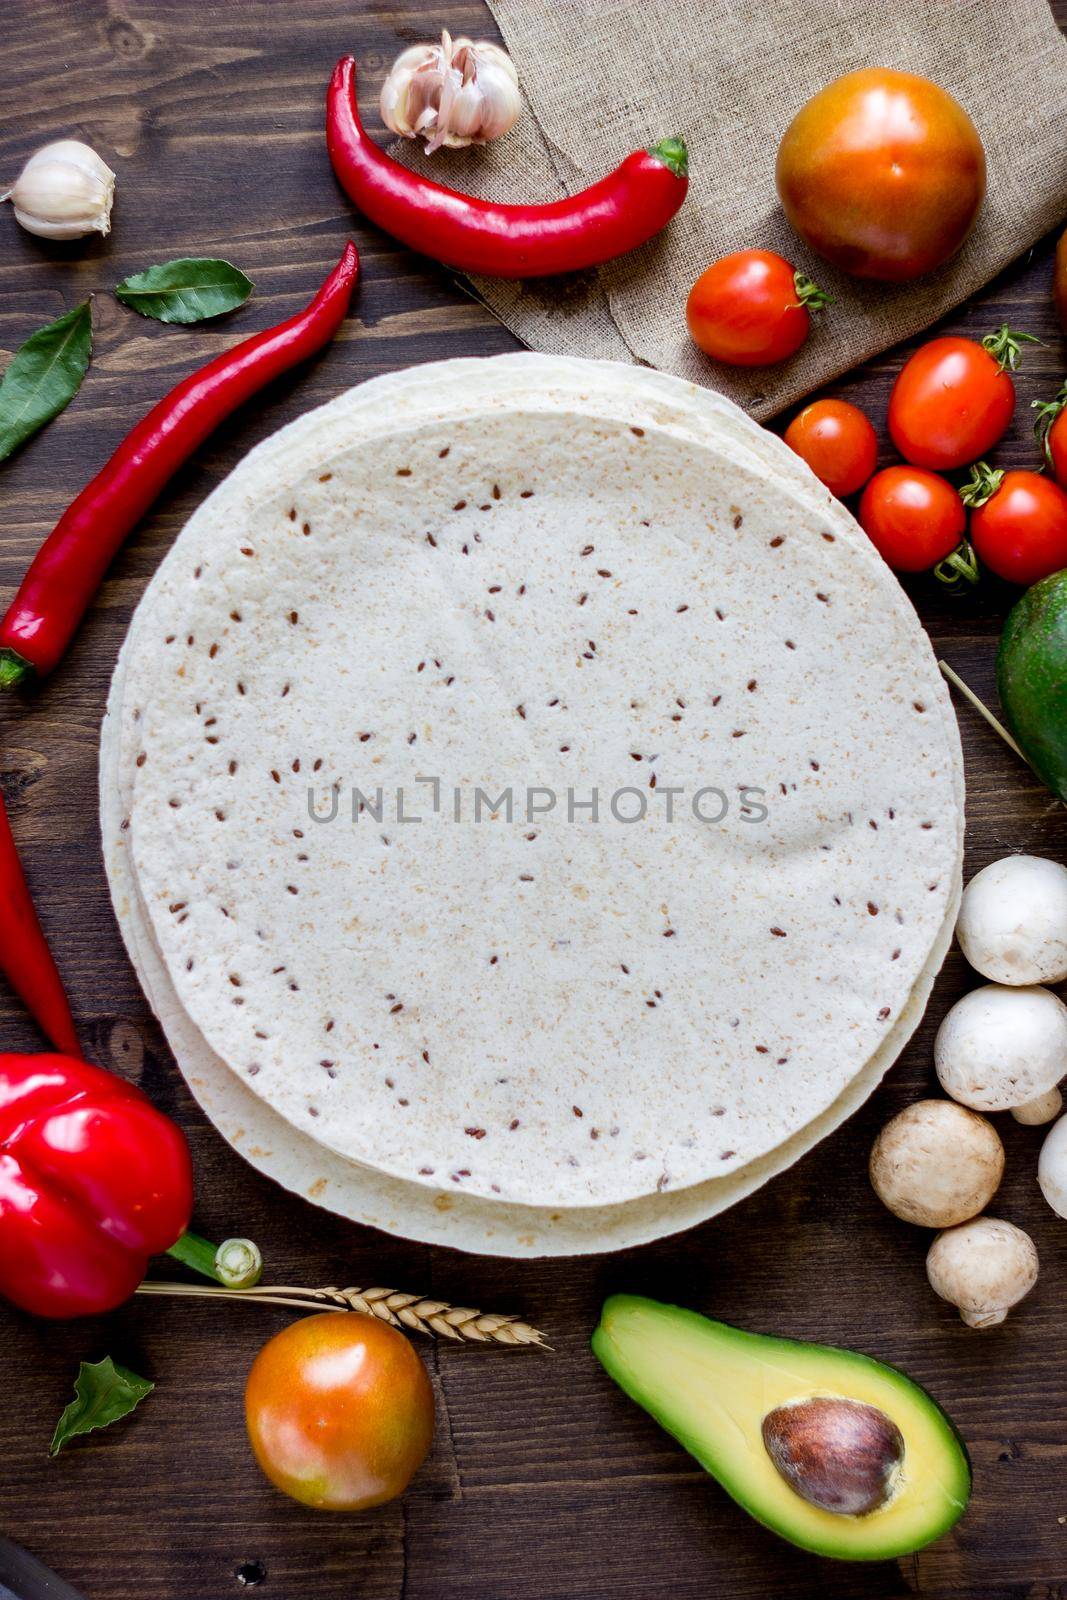 Tortillas - corn bread with vegetables on wooden table